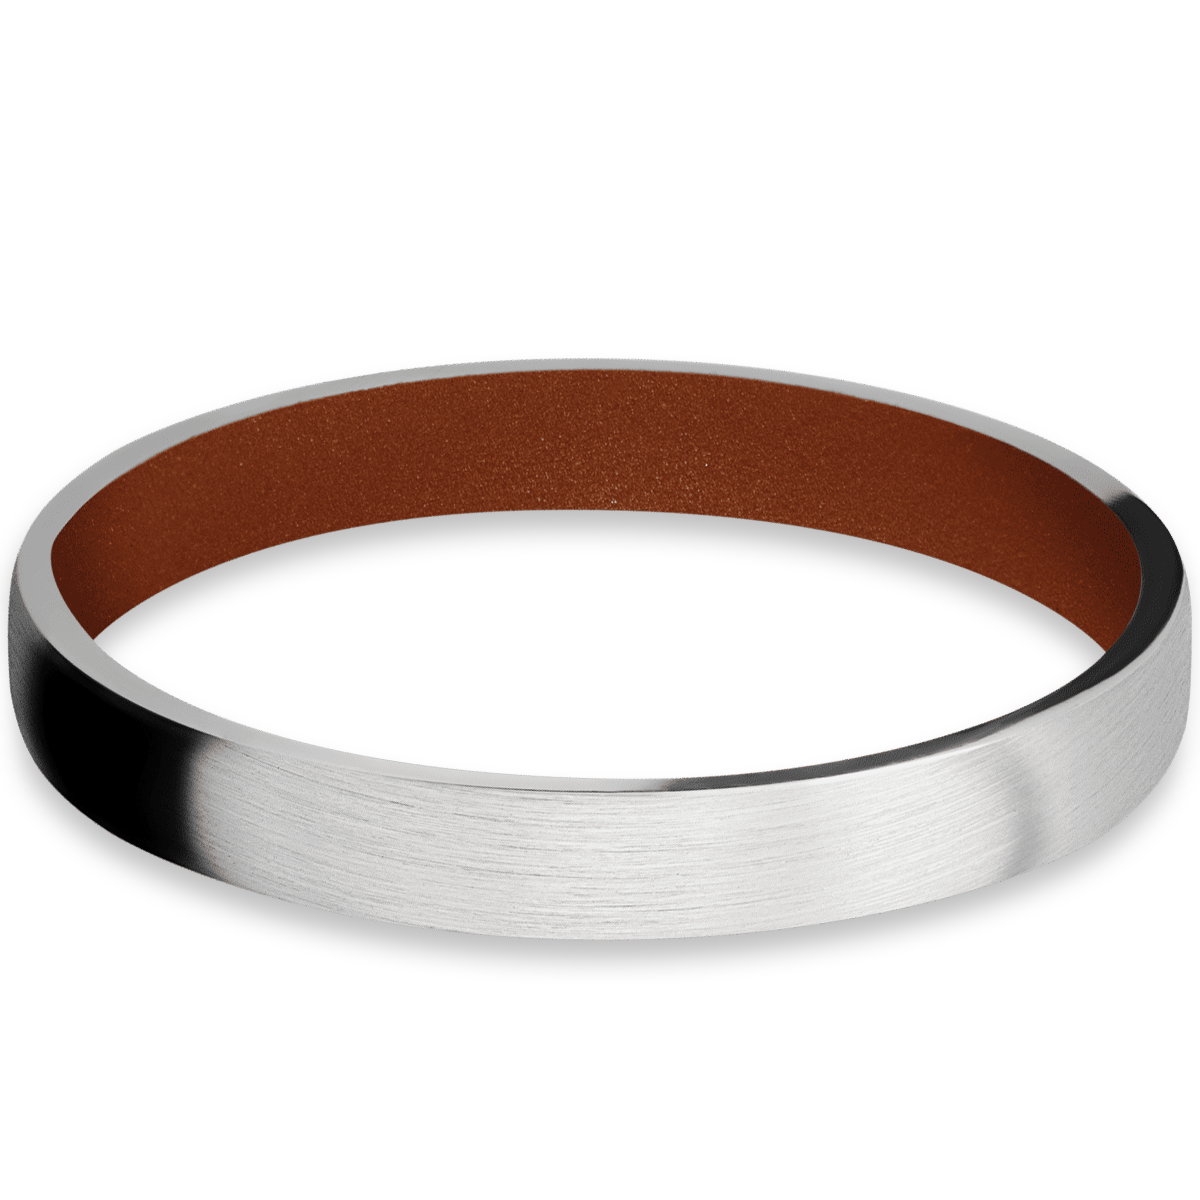 White Gold + Copper Suede Cerakote + Satin Finish Womens Wedding or Everyday Ring